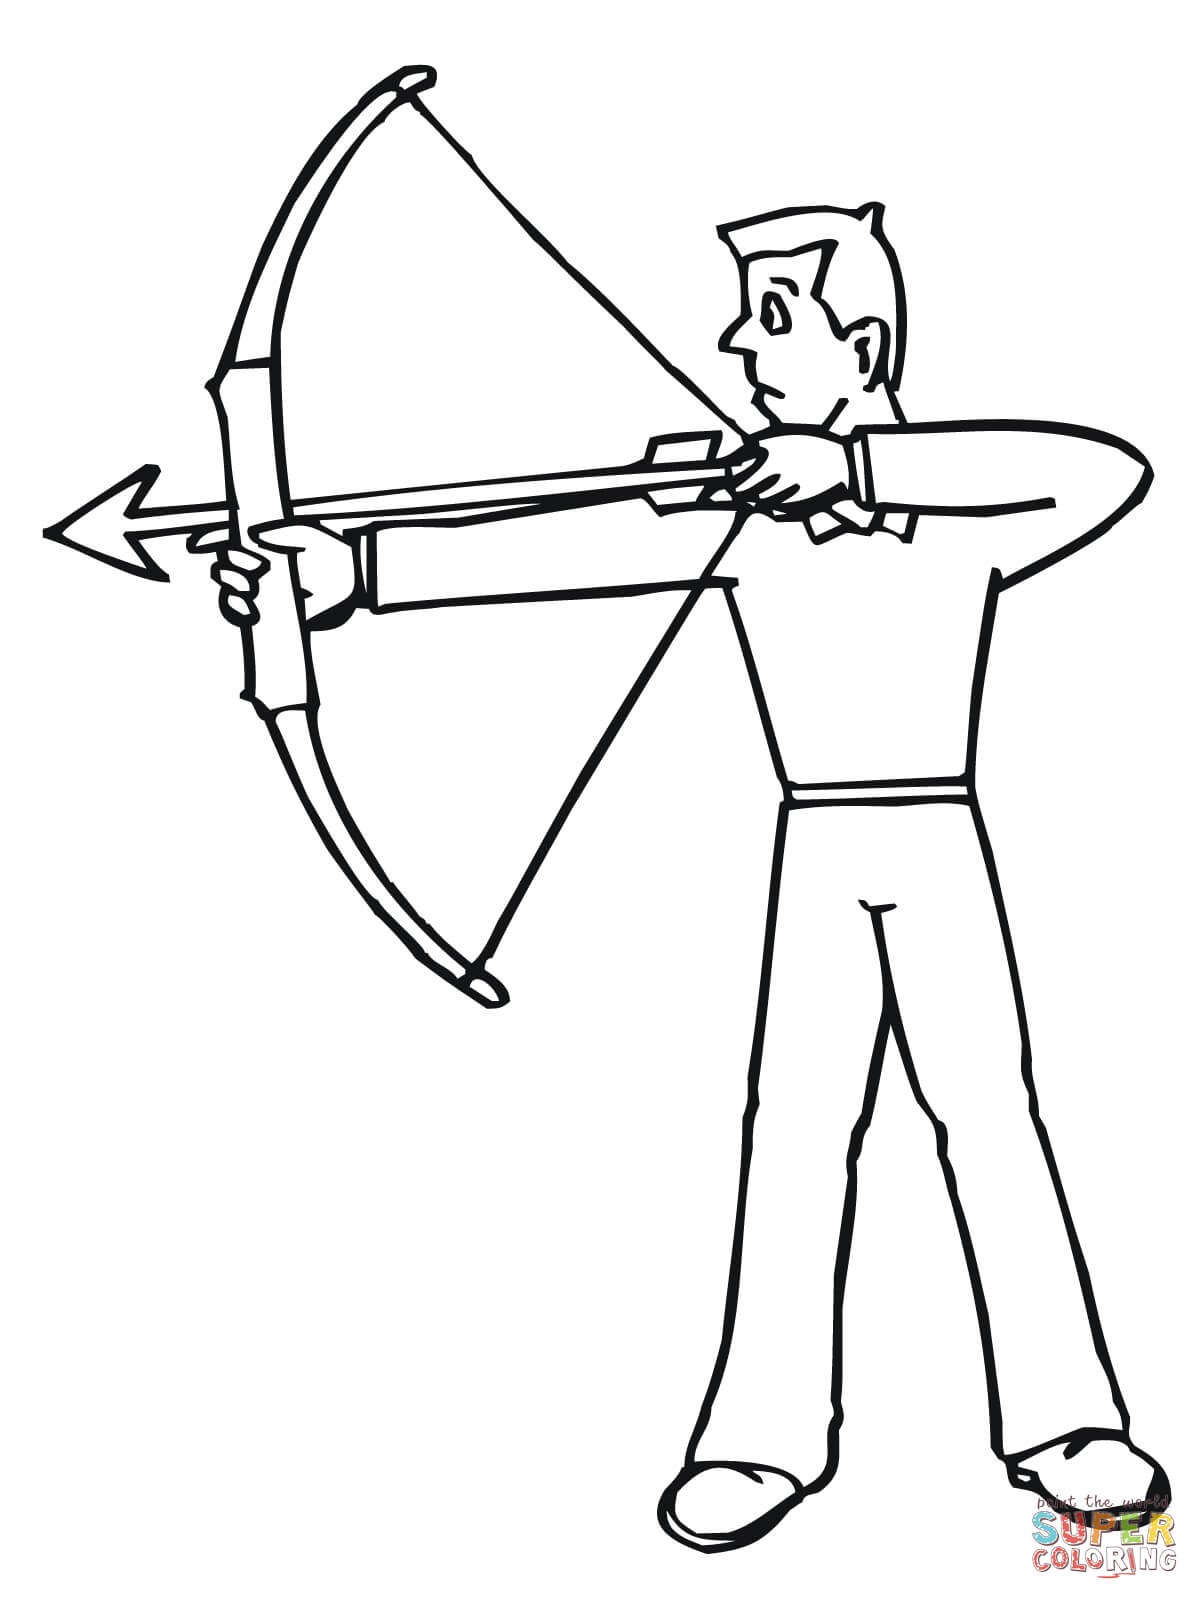 Bow And Arrow Coloring Page